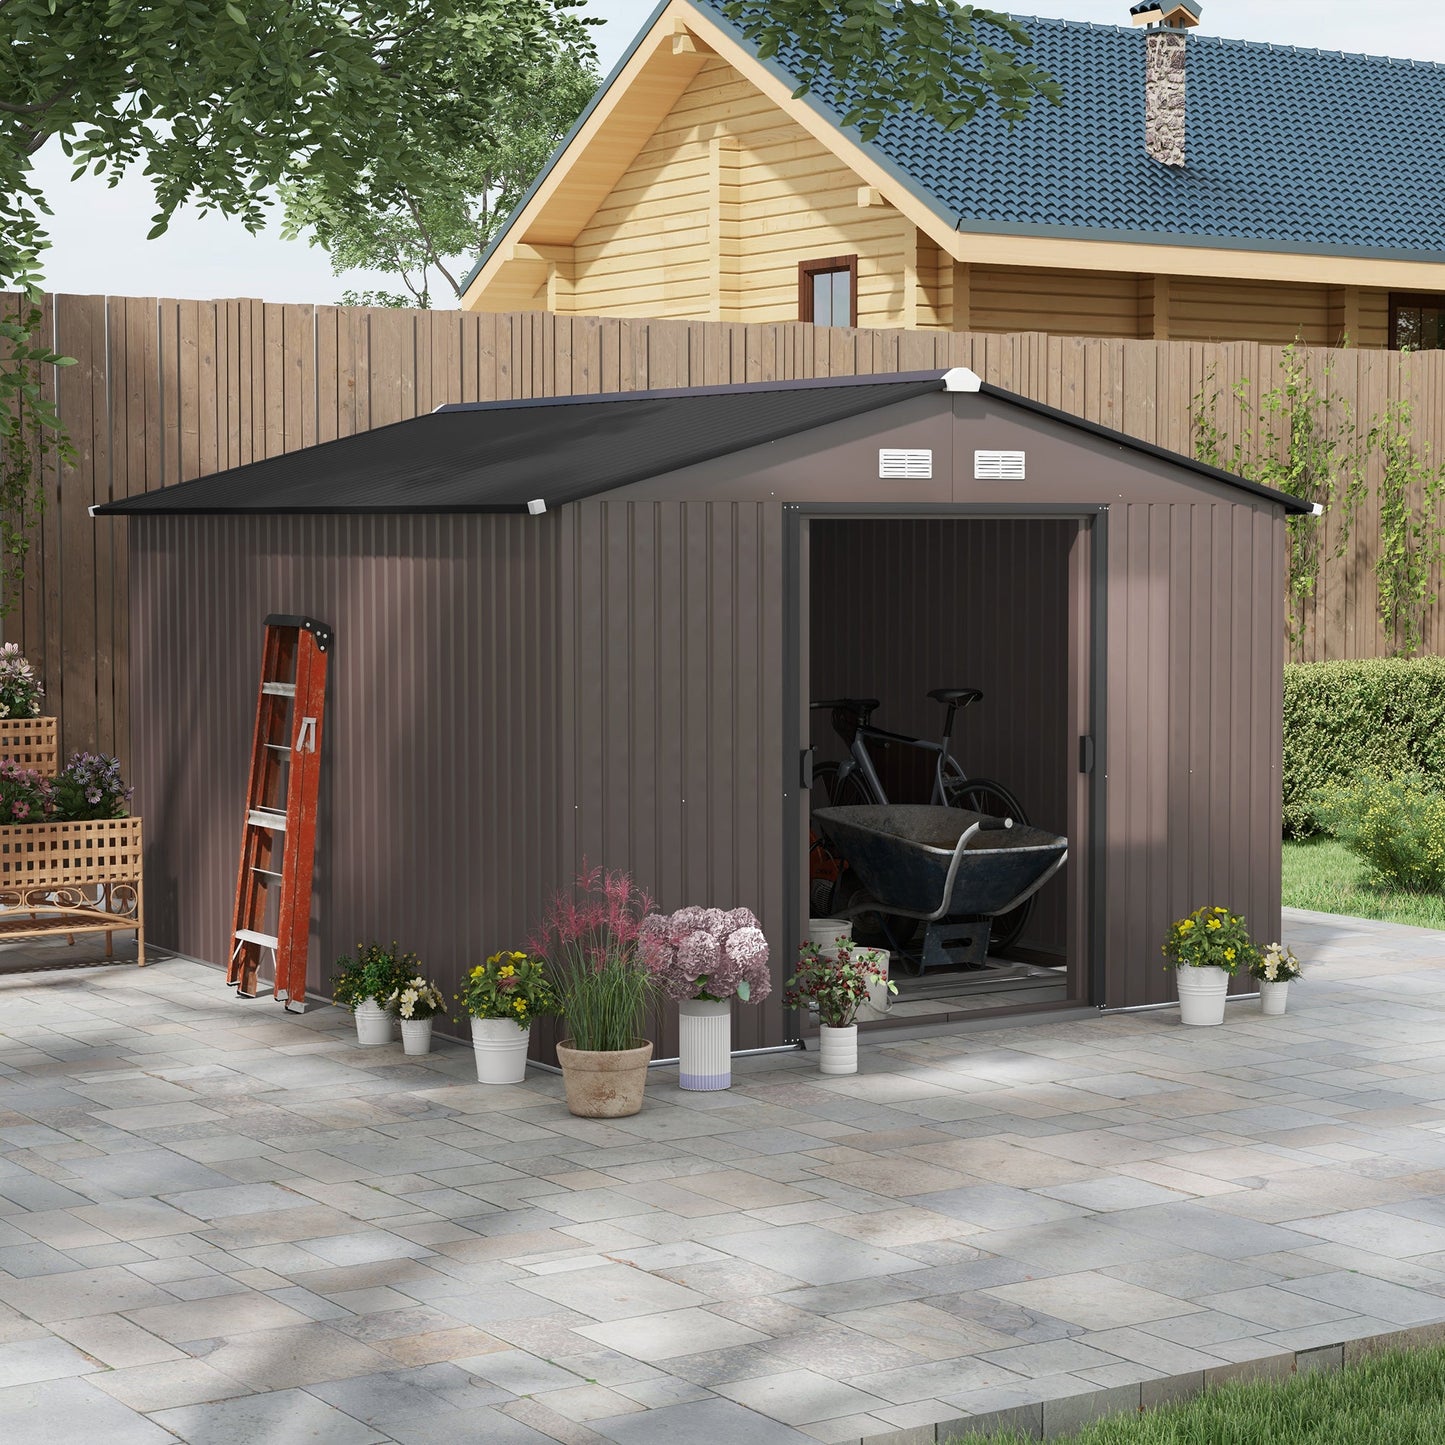 -Outsunny 11' x 9' Outdoor Storage Shed, Garden Tool House with Foundation, 4 Vents and 2 Easy Sliding Doors for Backyard, Patio, Garage, Lawn, Brown - Outdoor Style Company